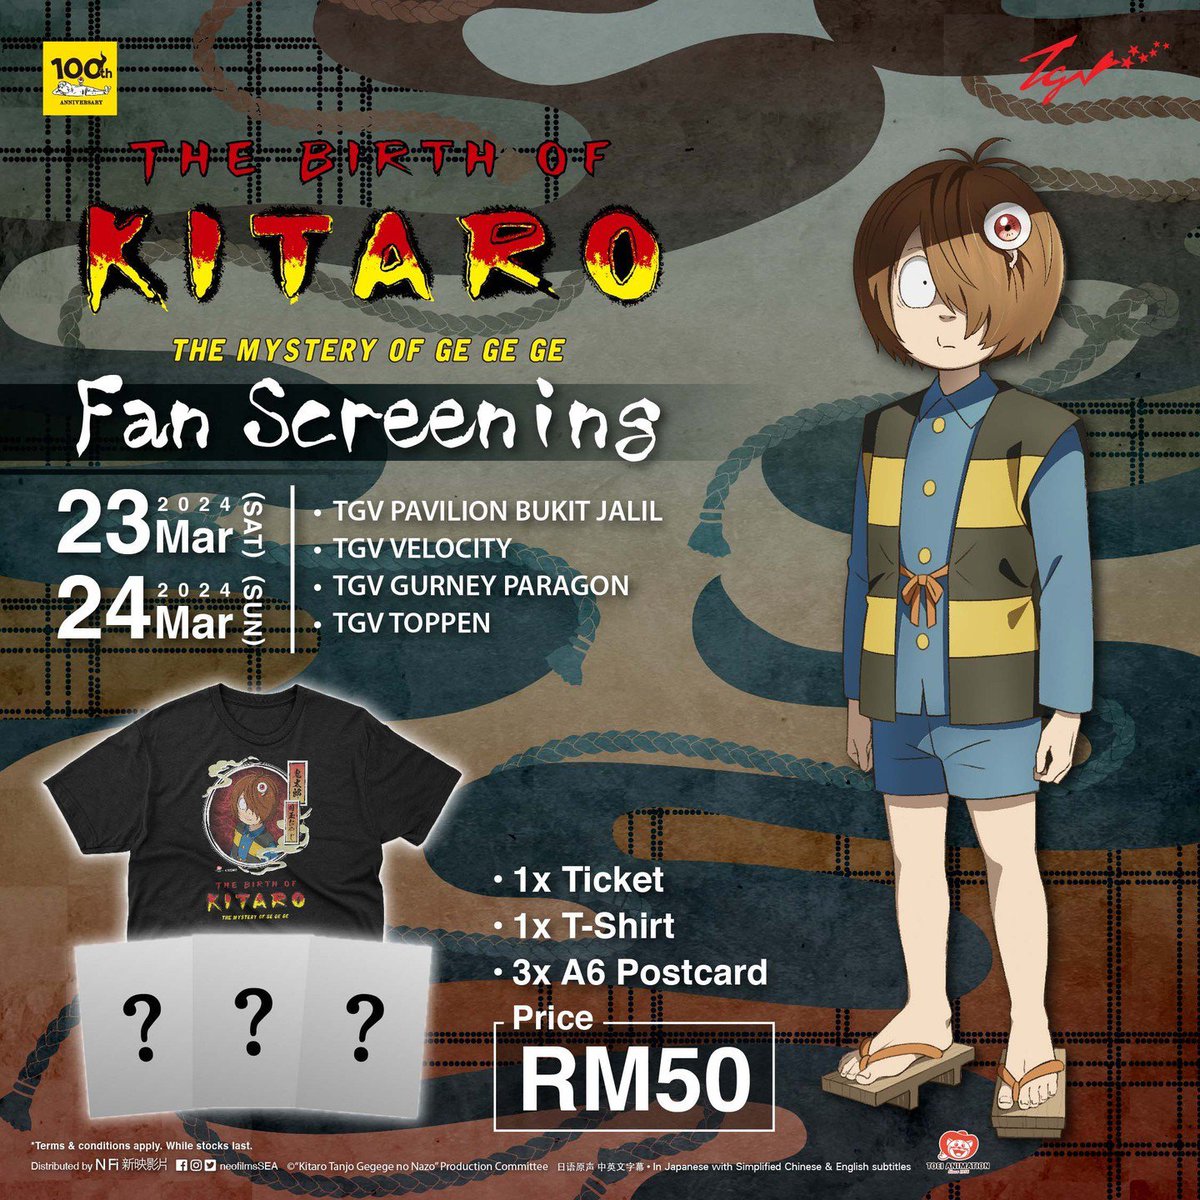 Be the FIRST to watch #TheBirthofKitaro: The Mystery of Ge Ge Ge at the FAN SCREENING this 23 - 24 March at selected TGV locations. You'll get exclusive merchandise for RM50! Get your tickets now 🎟️ bit.ly/TGV-TBOKFS